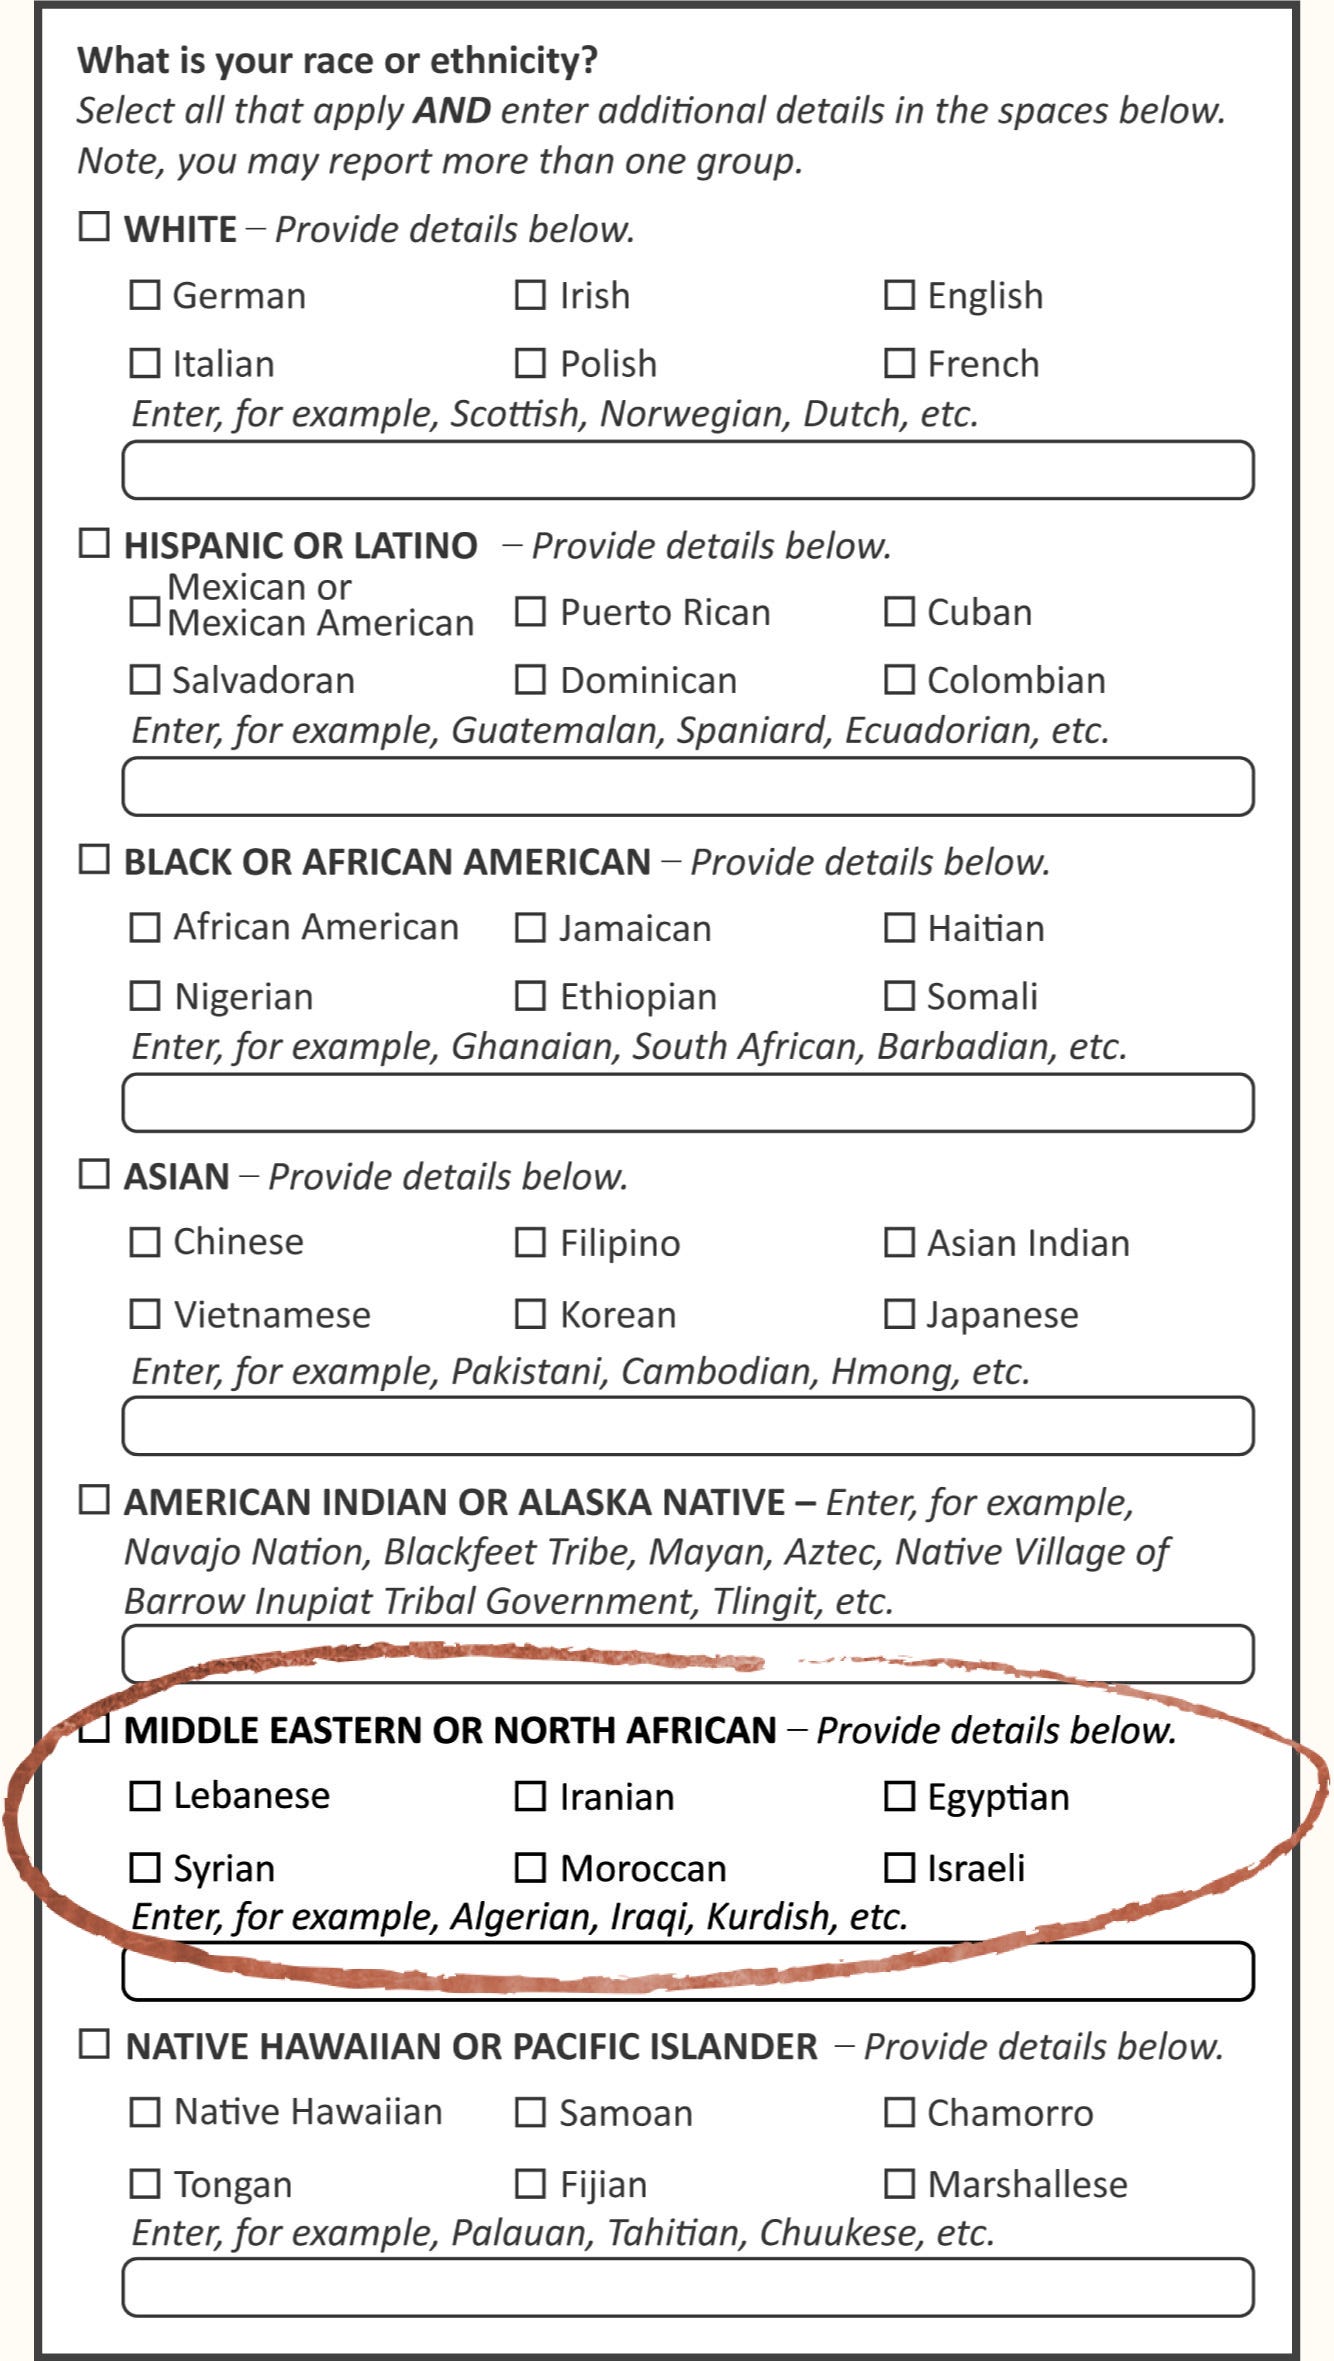 Sample of the proposed census form, with the proposed MENA addition circled to highlight it. It reads “Middle Eastern or North African — Provide details below.” There are check boxes for Lebanese, Iranian, Egyptian, Syrian, Moroccan and Israeli. There is a space for additional details with instructions that say “Enter, for example, Algerian, Iraqi, Kurdish, etc.”